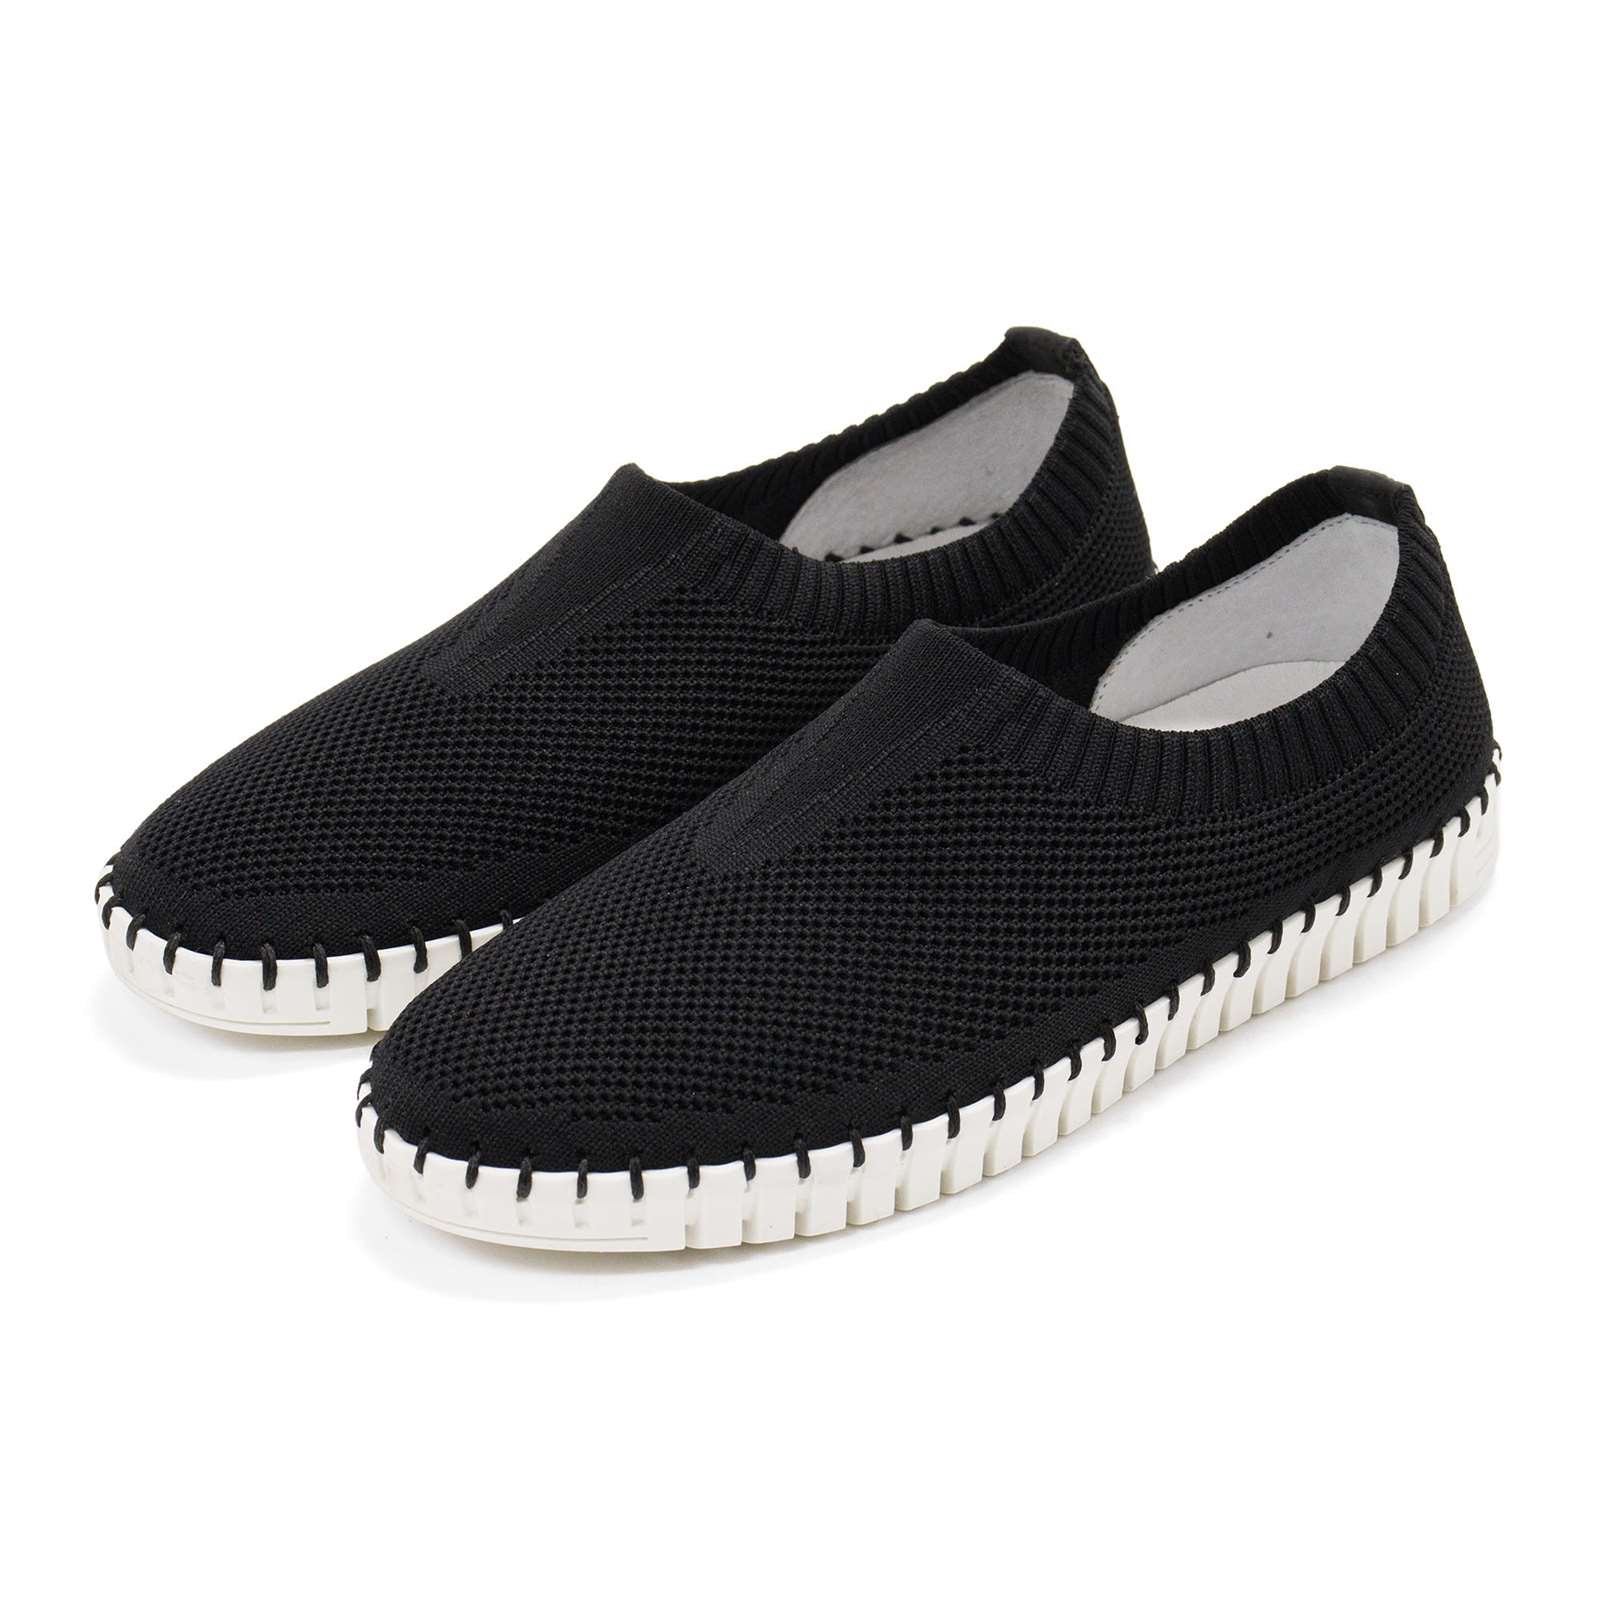 Eric Michael Women Lucy Slip-On Stretchable Flats